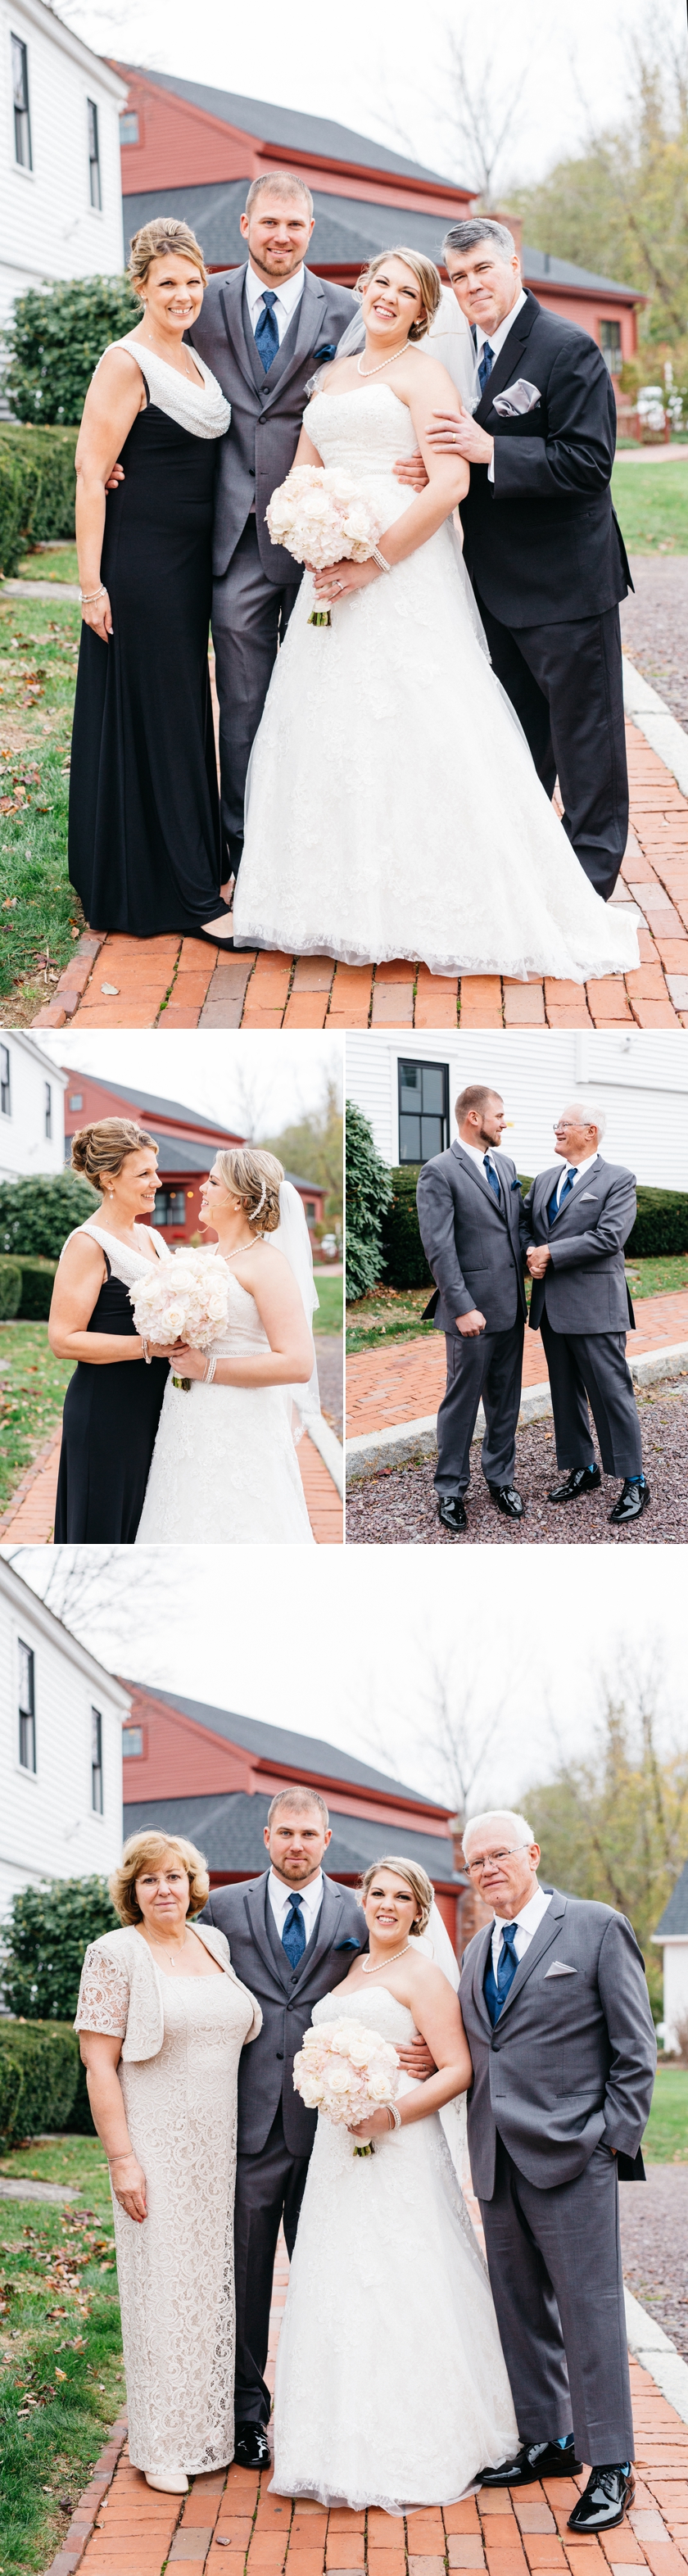 photo collage of family formals at nichole and george's classic wedding at the wight barn in sturbridge massachusetts